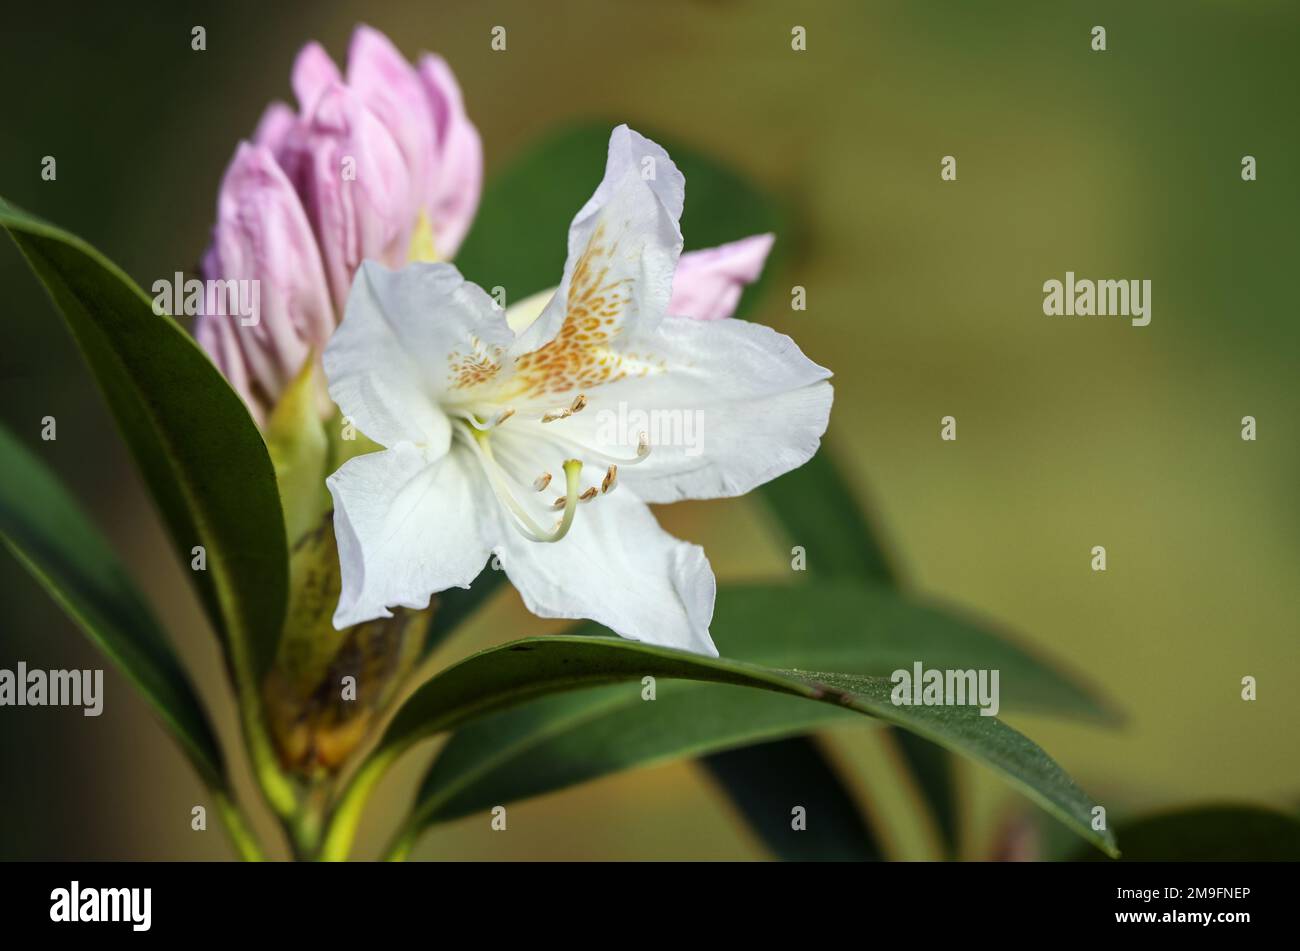 White flower and pink bud of an azalea shrub, genus Rhododendron, blooming in spring, natural green background copy space, selected focus, narrow dept Stock Photo